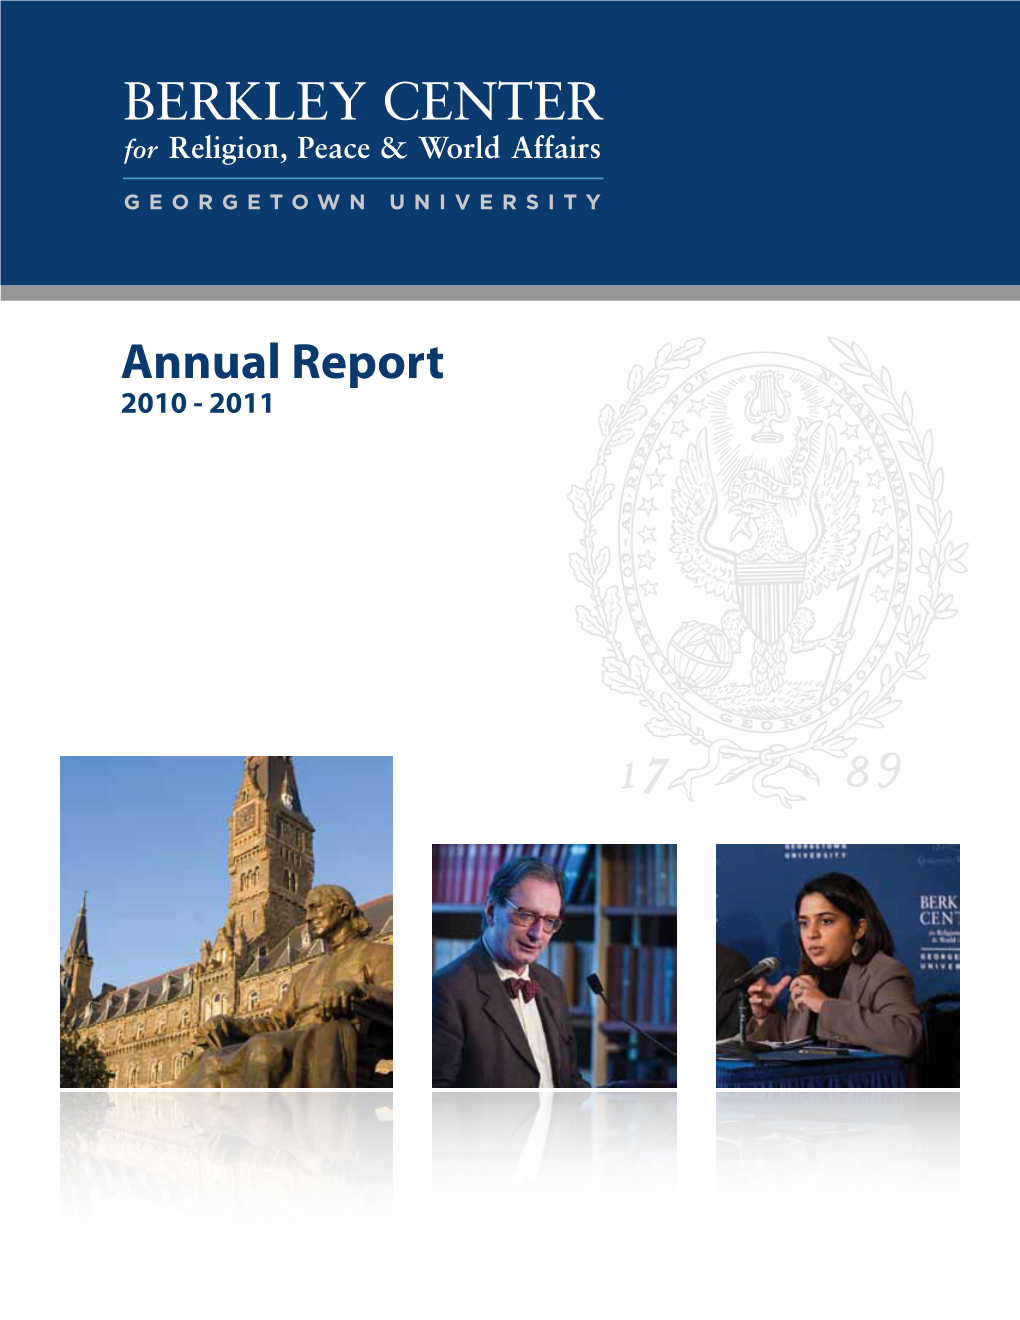 Annual Report 2010 - 2011 About the Berkley Center